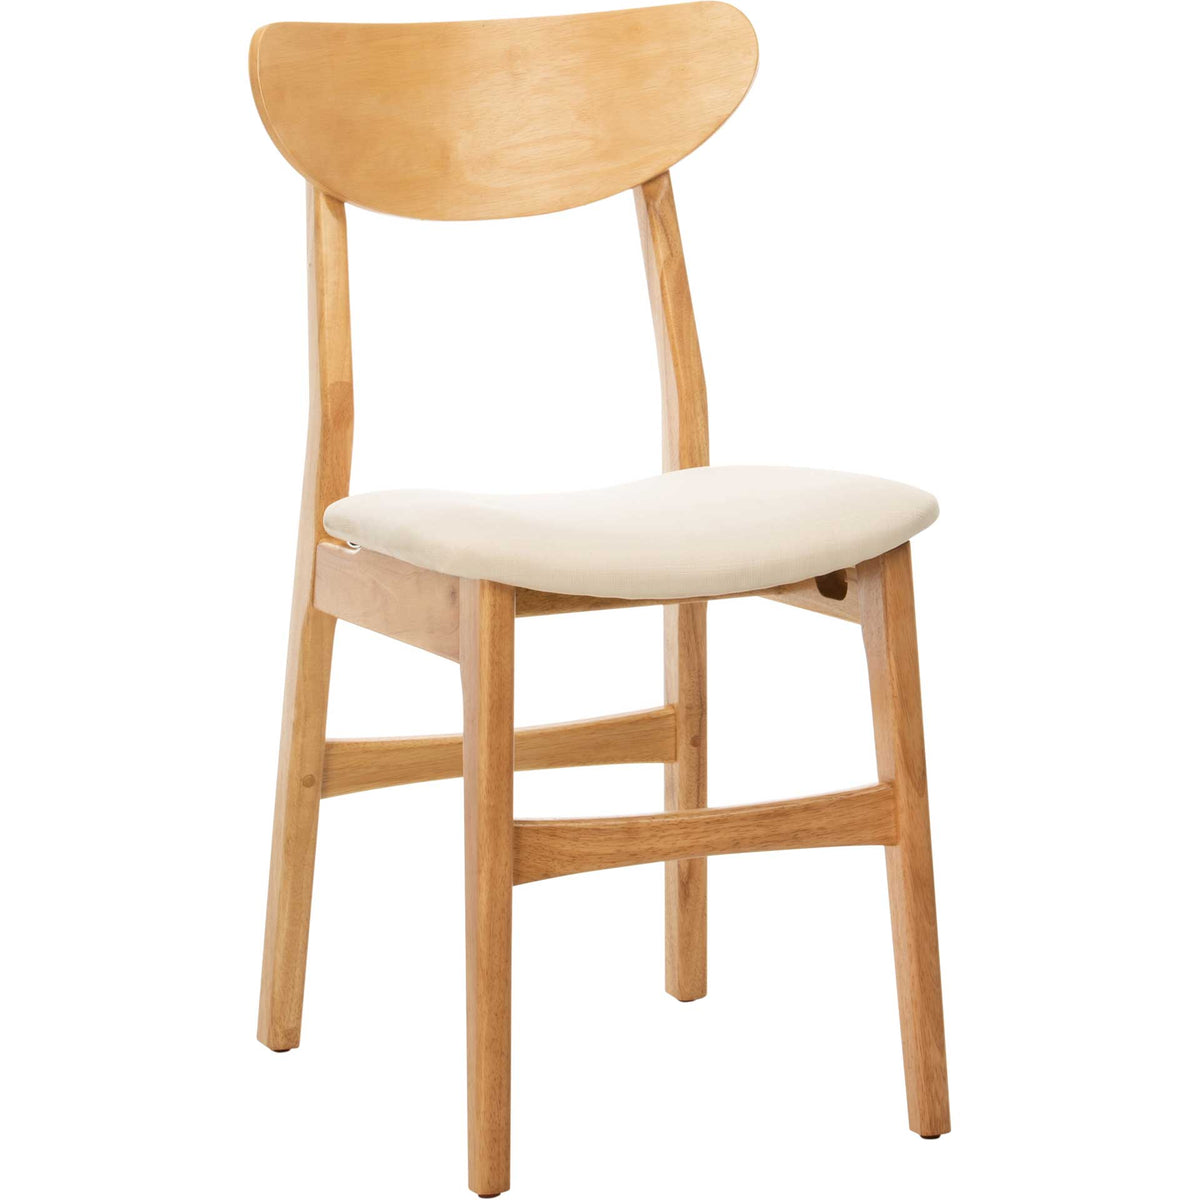 Lucas Retro Dining Chair Natural/White (Set of 2)